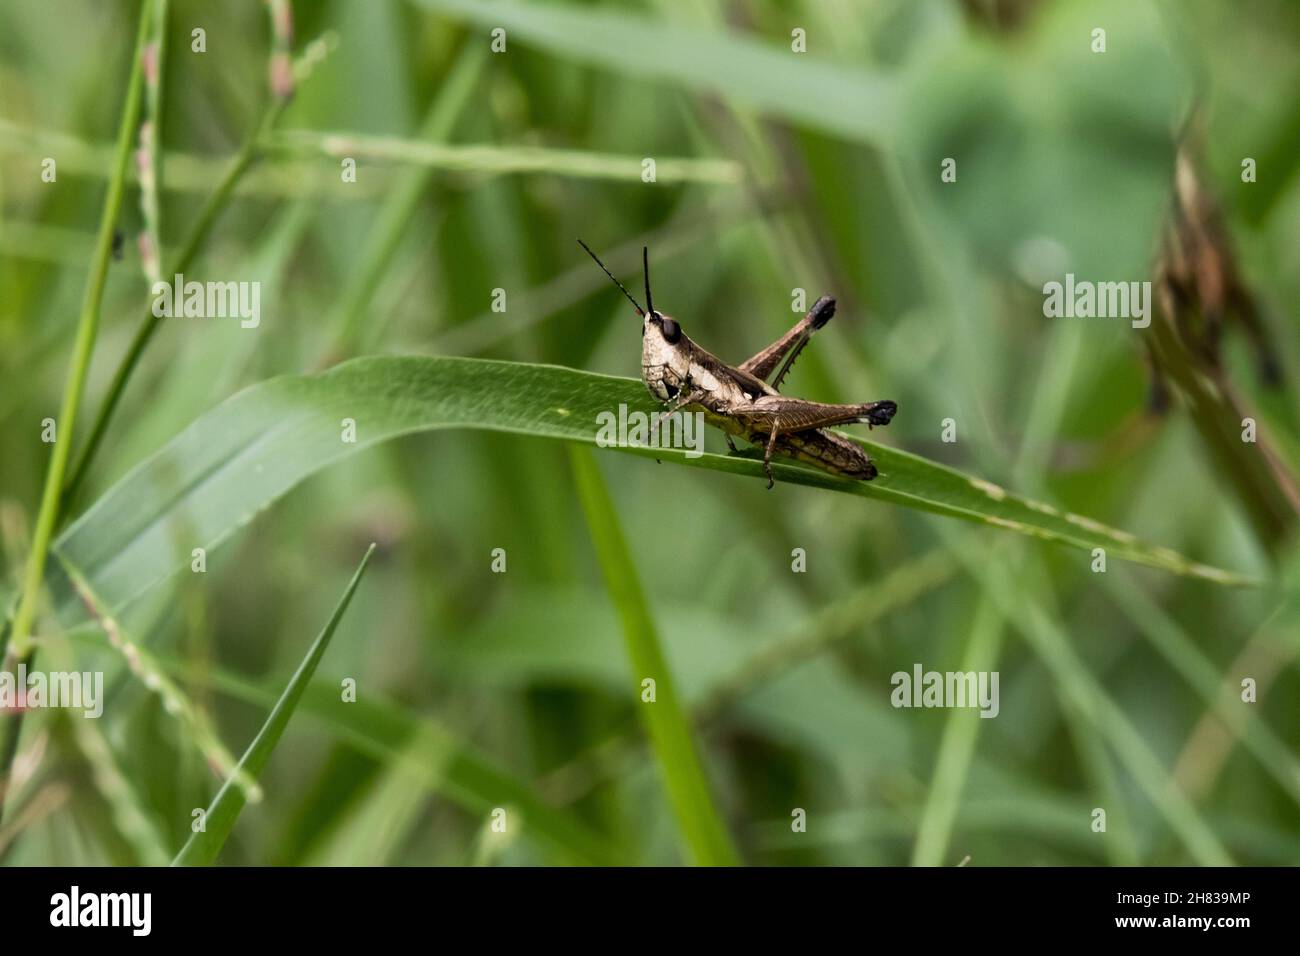 A view of a grasshopper sitting on a leaf. Stock Photo